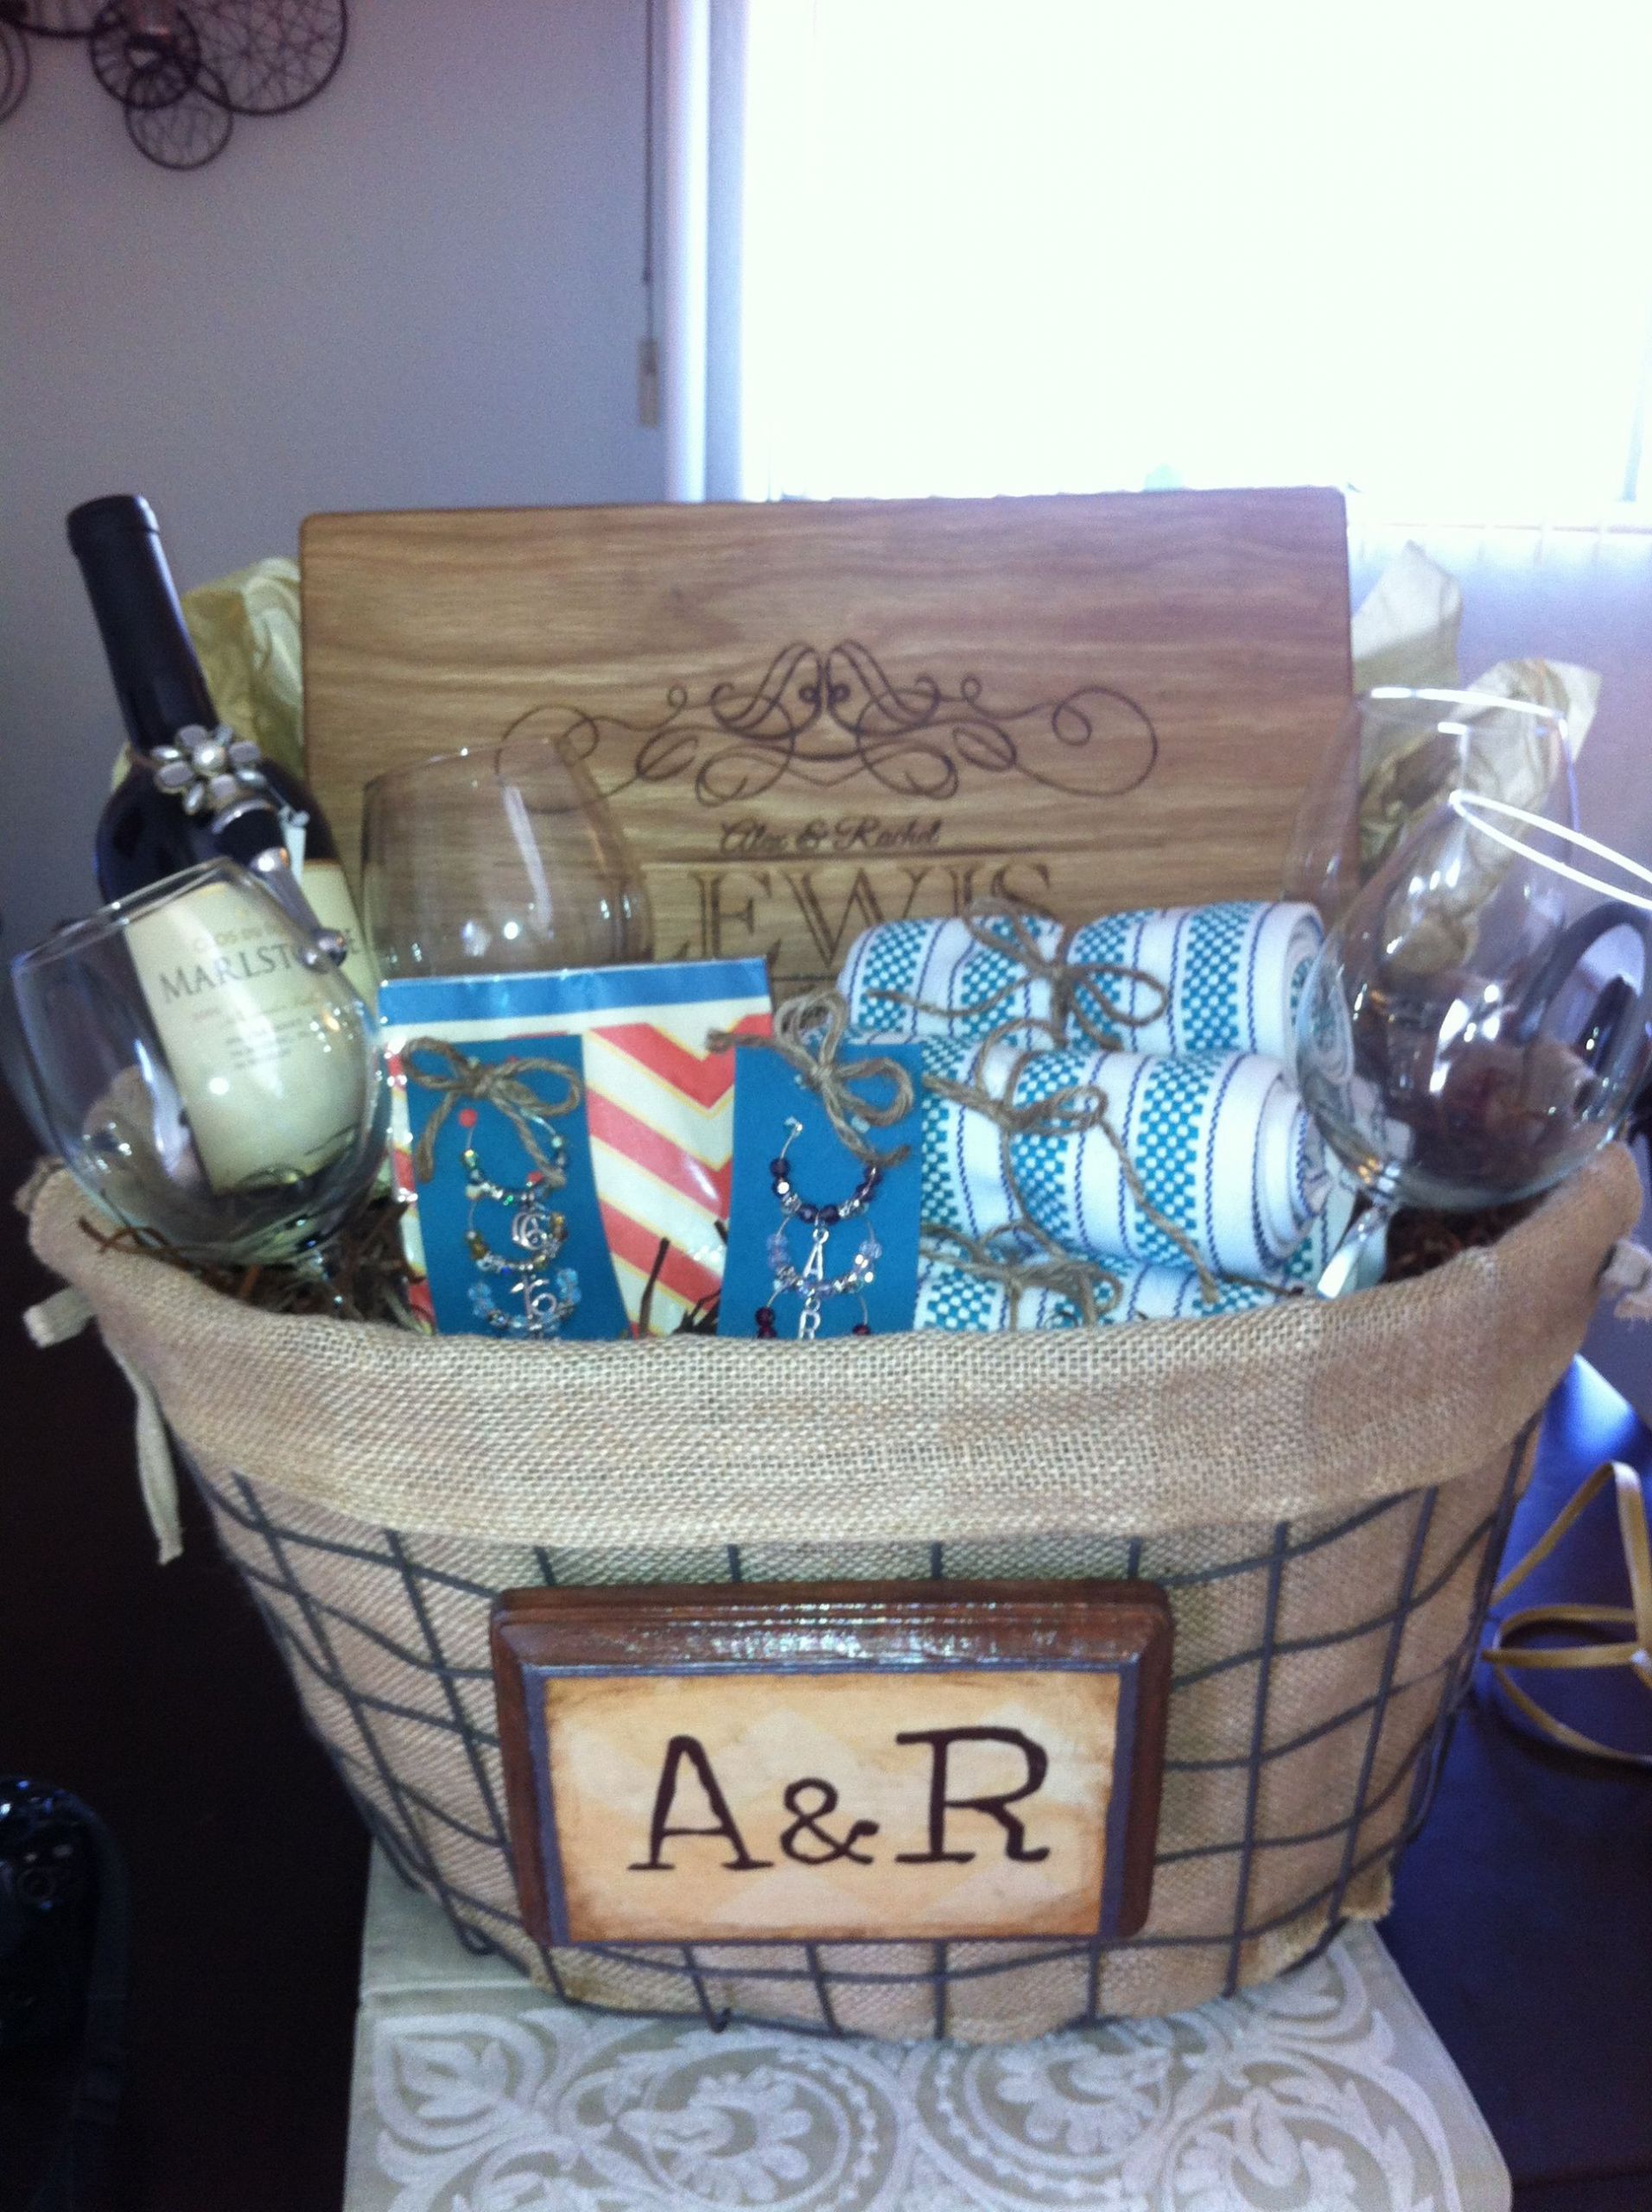 Personalized Gift Basket Ideas
 t basket Could use Bloxstyle s Personalized Cutting